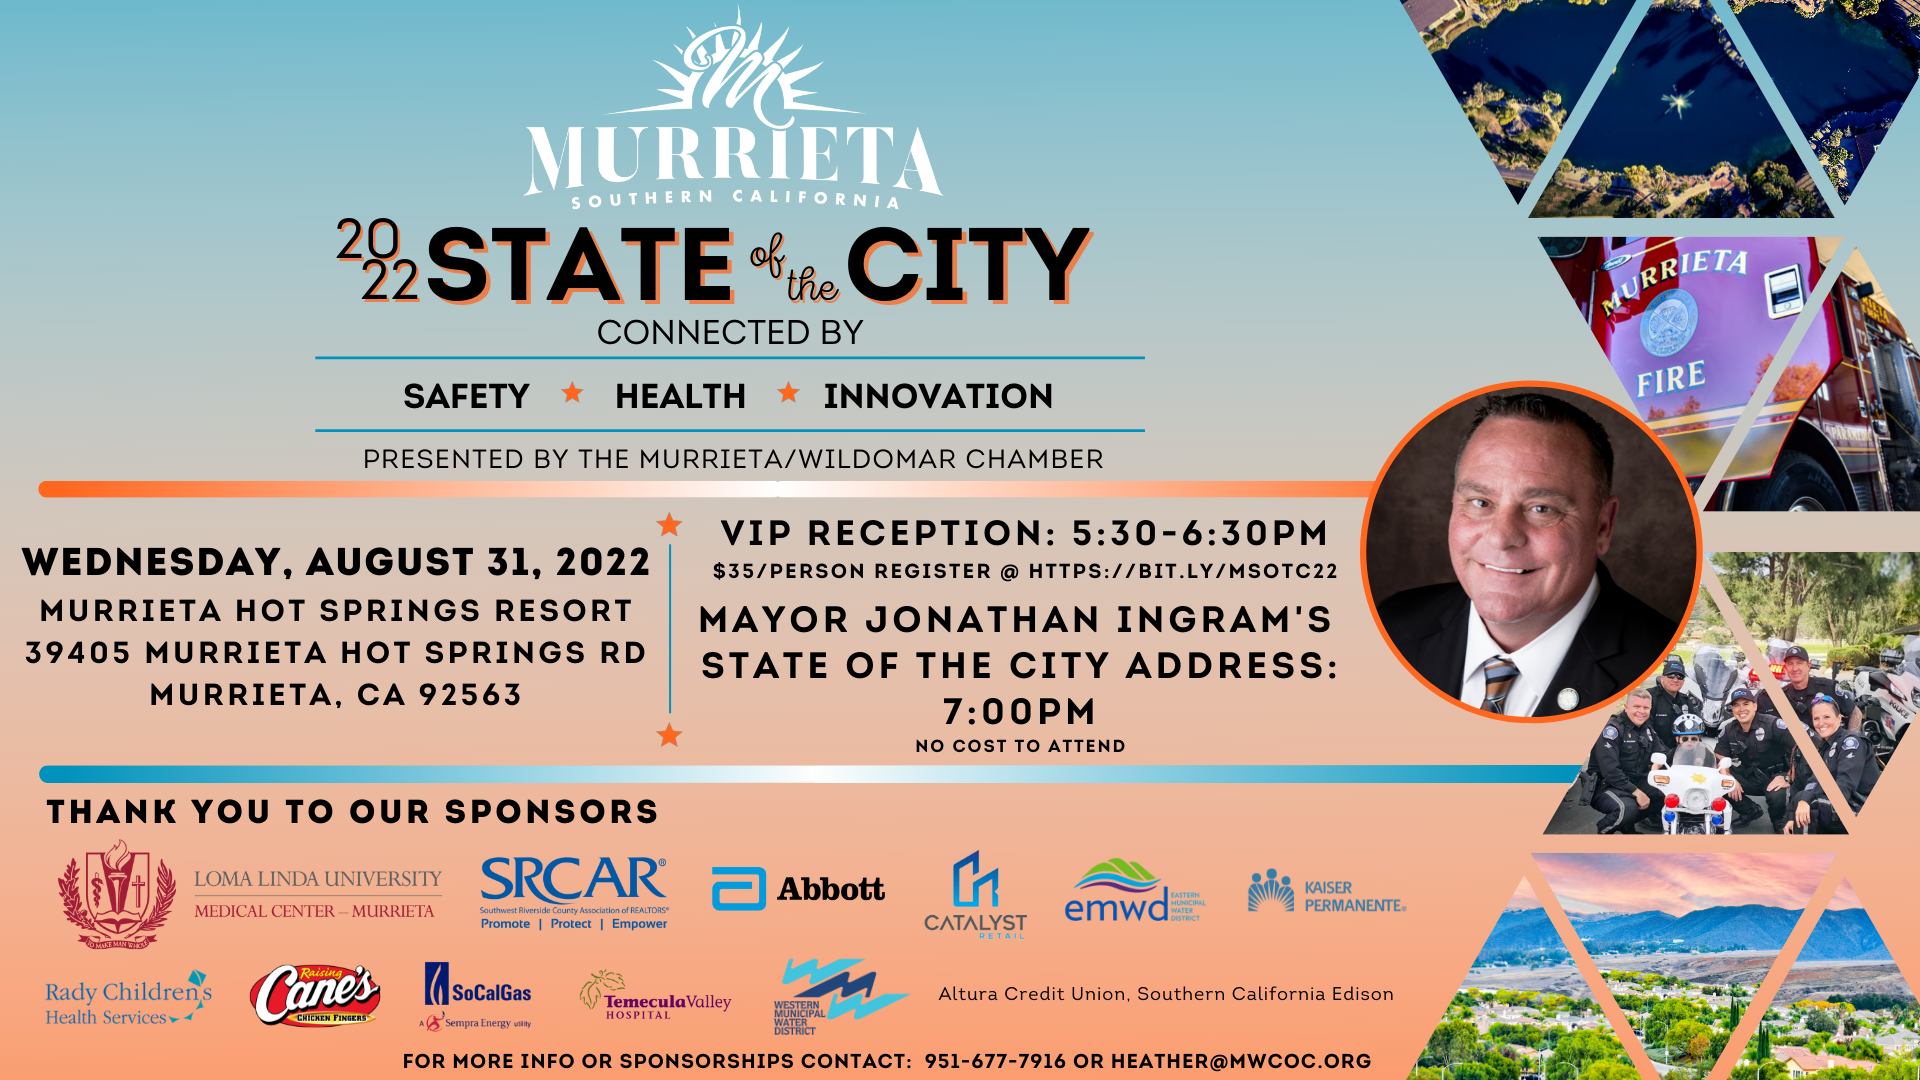 Murrieta Mayor Jonathan Ingram to Deliver State of the City Address at